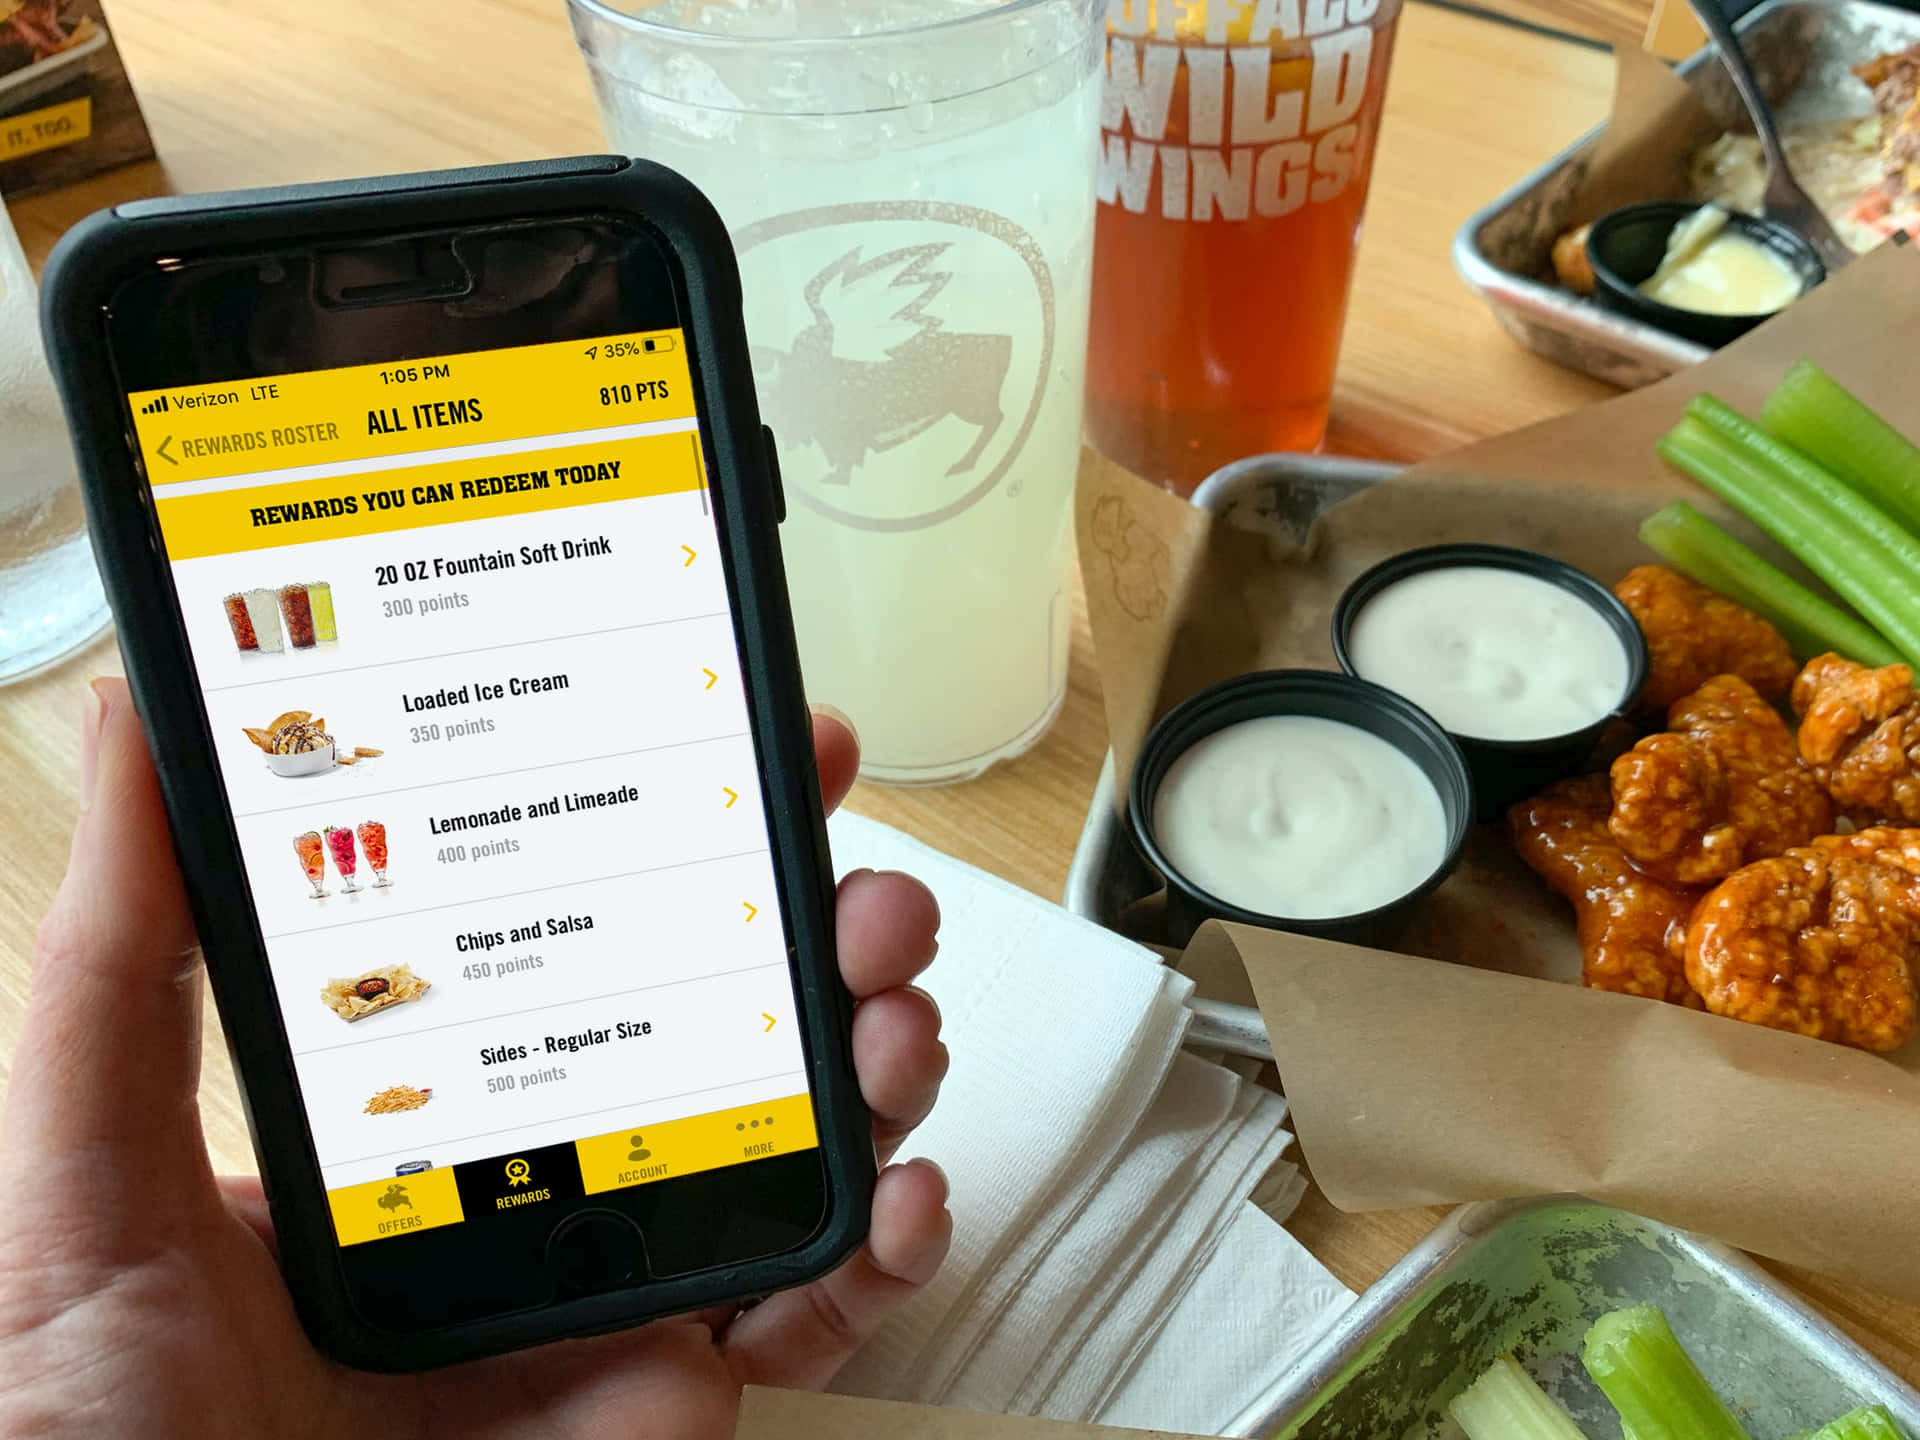 Get your game day ready with Buffalo Wild Wings!